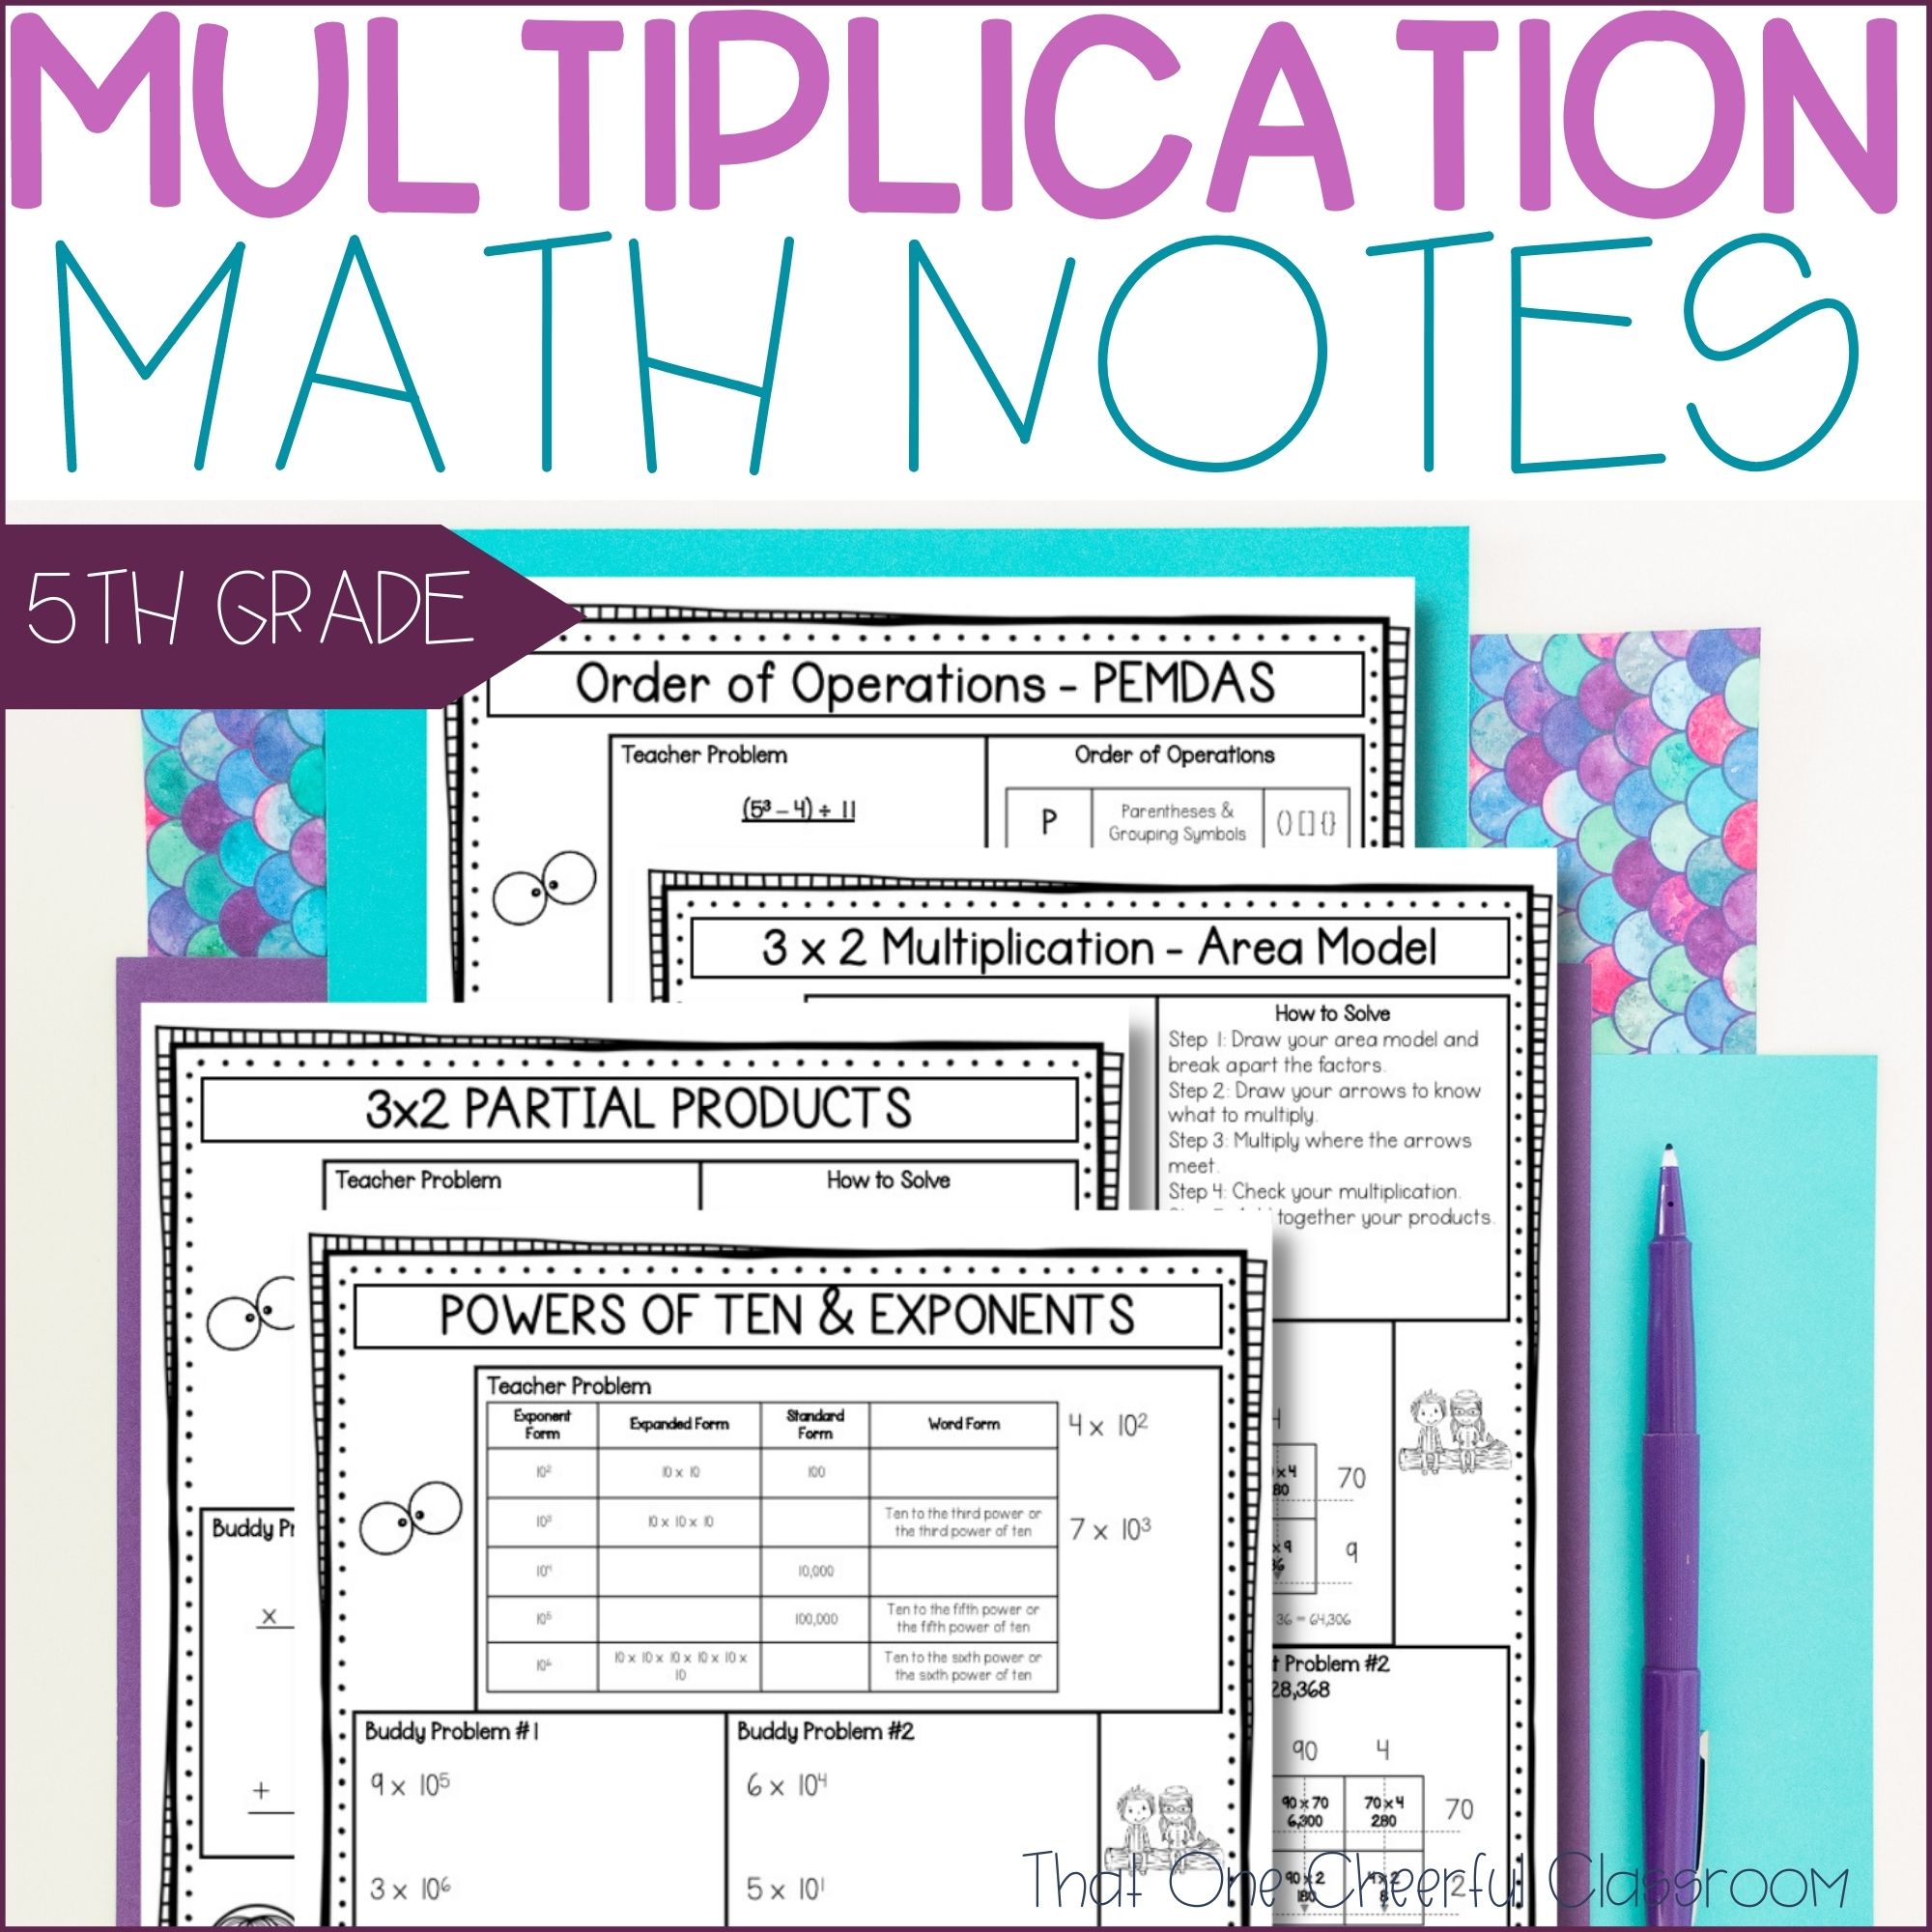 5th Grade Place Value, Multiplication, Exponents Math Notes